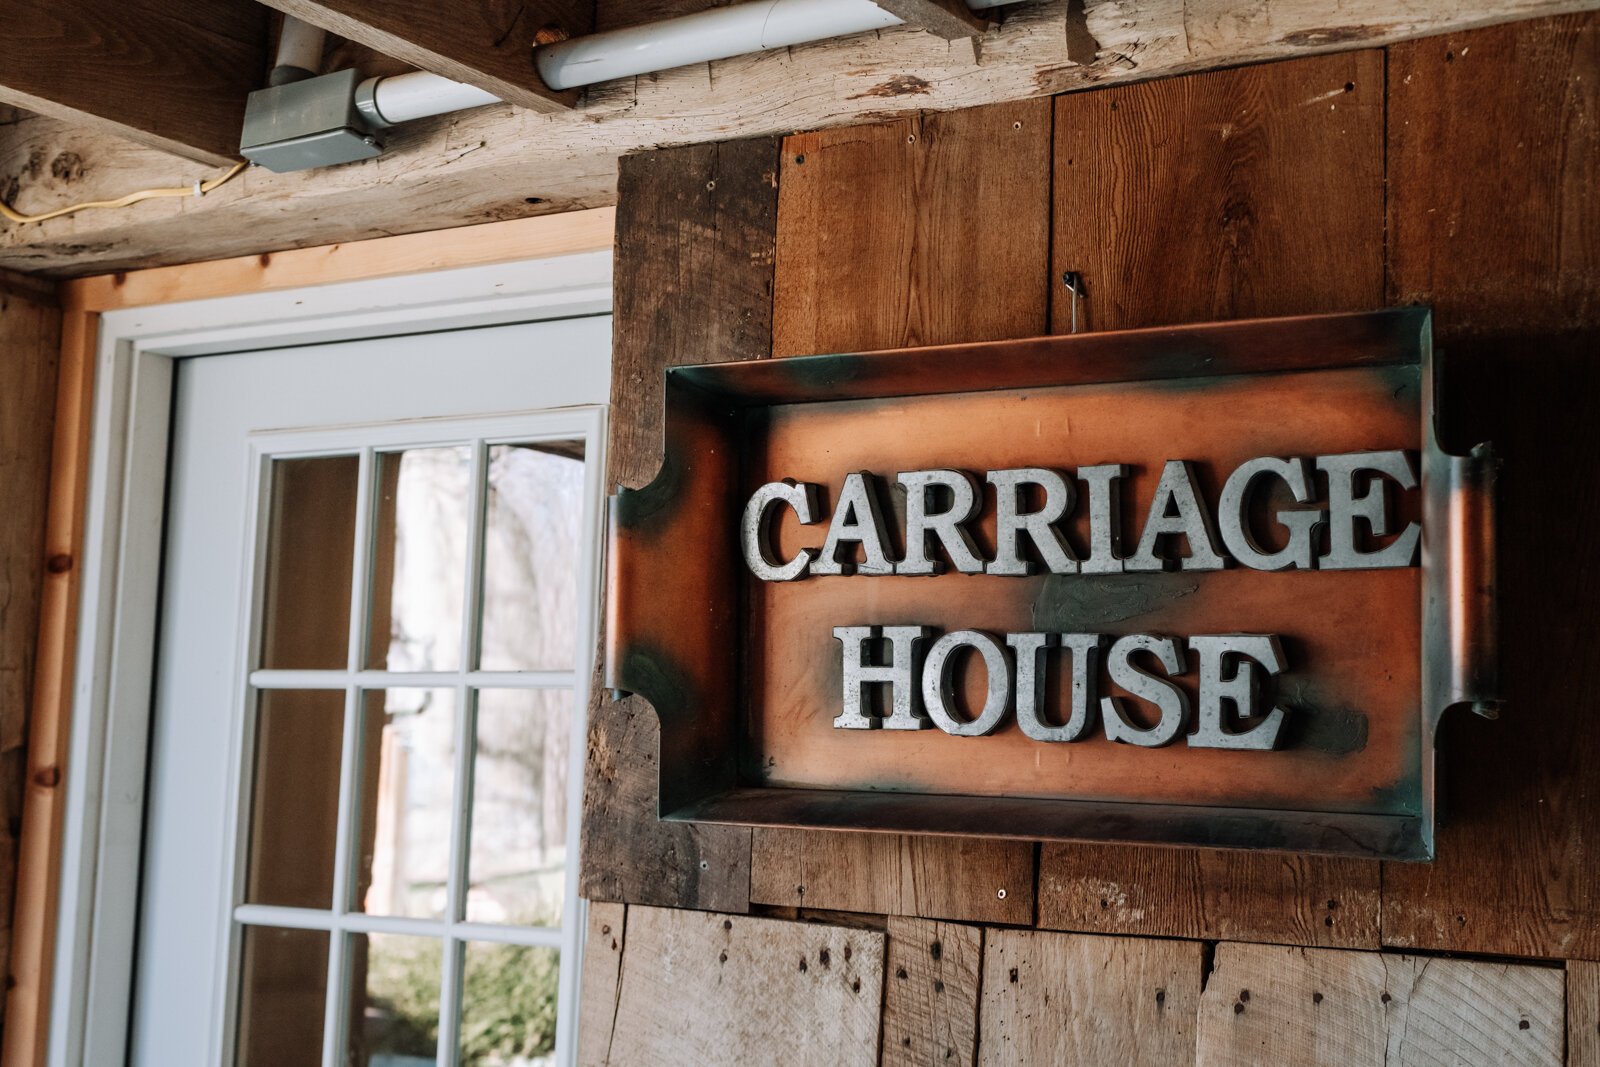 The Carriage House is a popular rustic loft getaway for Airbnb guests in Wabash County, located above a horse barn within walking distance of Salamonie State Park & Reservoir.